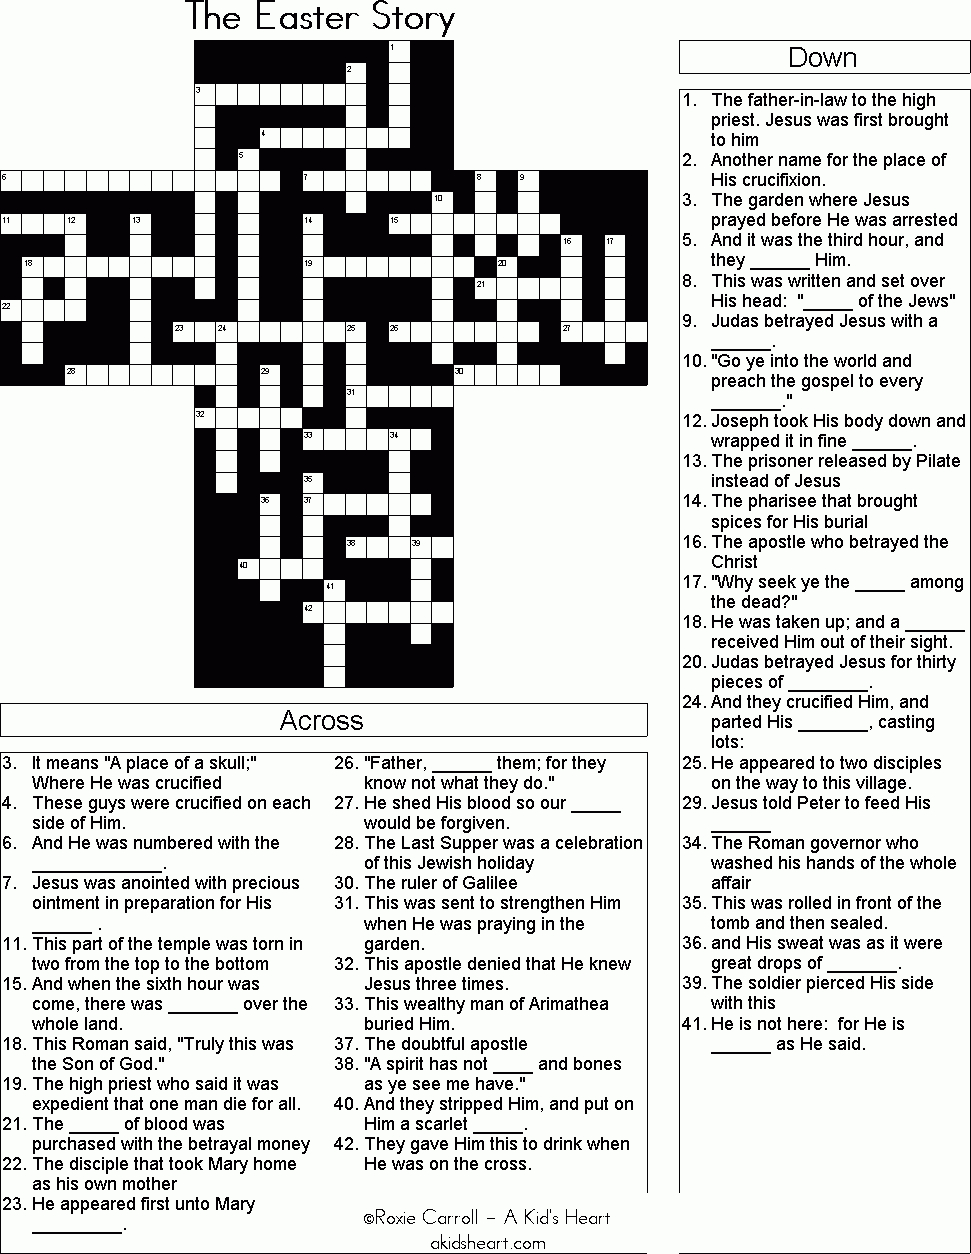 The Easter Story Crossword Puzzle | Bible Crosswords/word Search - Printable Biblical Puzzle